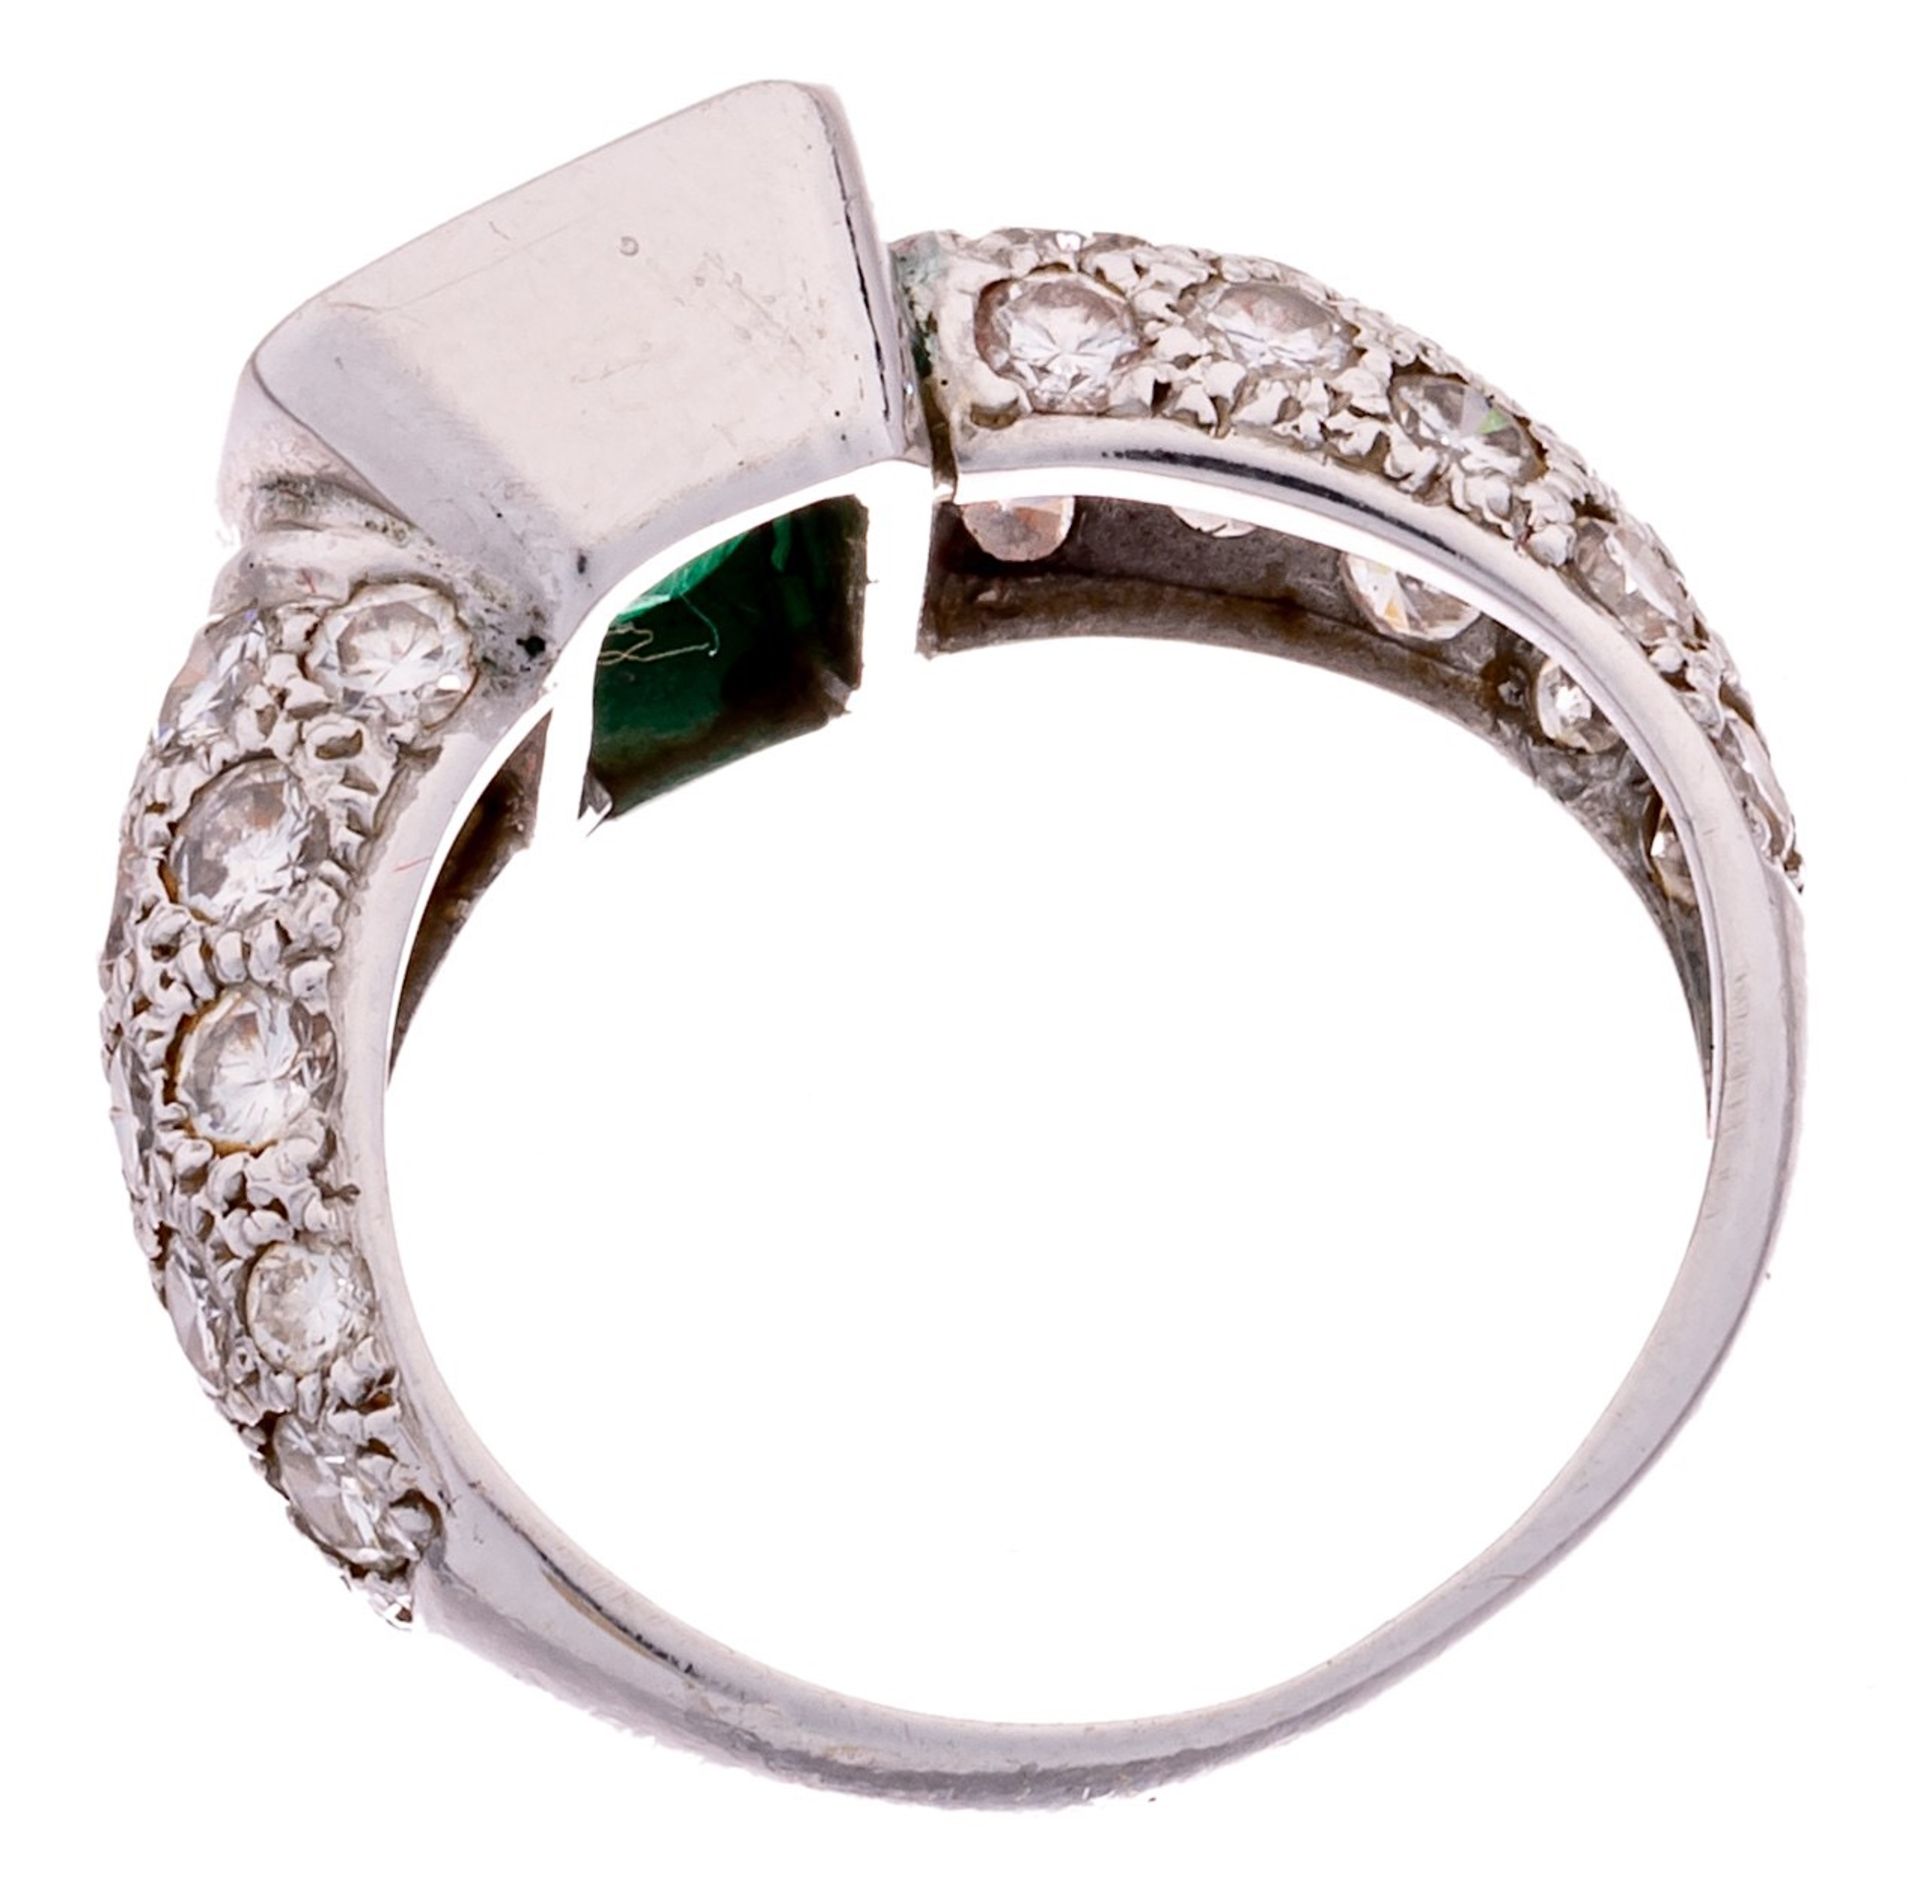 An 18ct white gold ring, set with a central dark green emerald and brilliant-cut diamonds, 7,4 g - Image 3 of 4